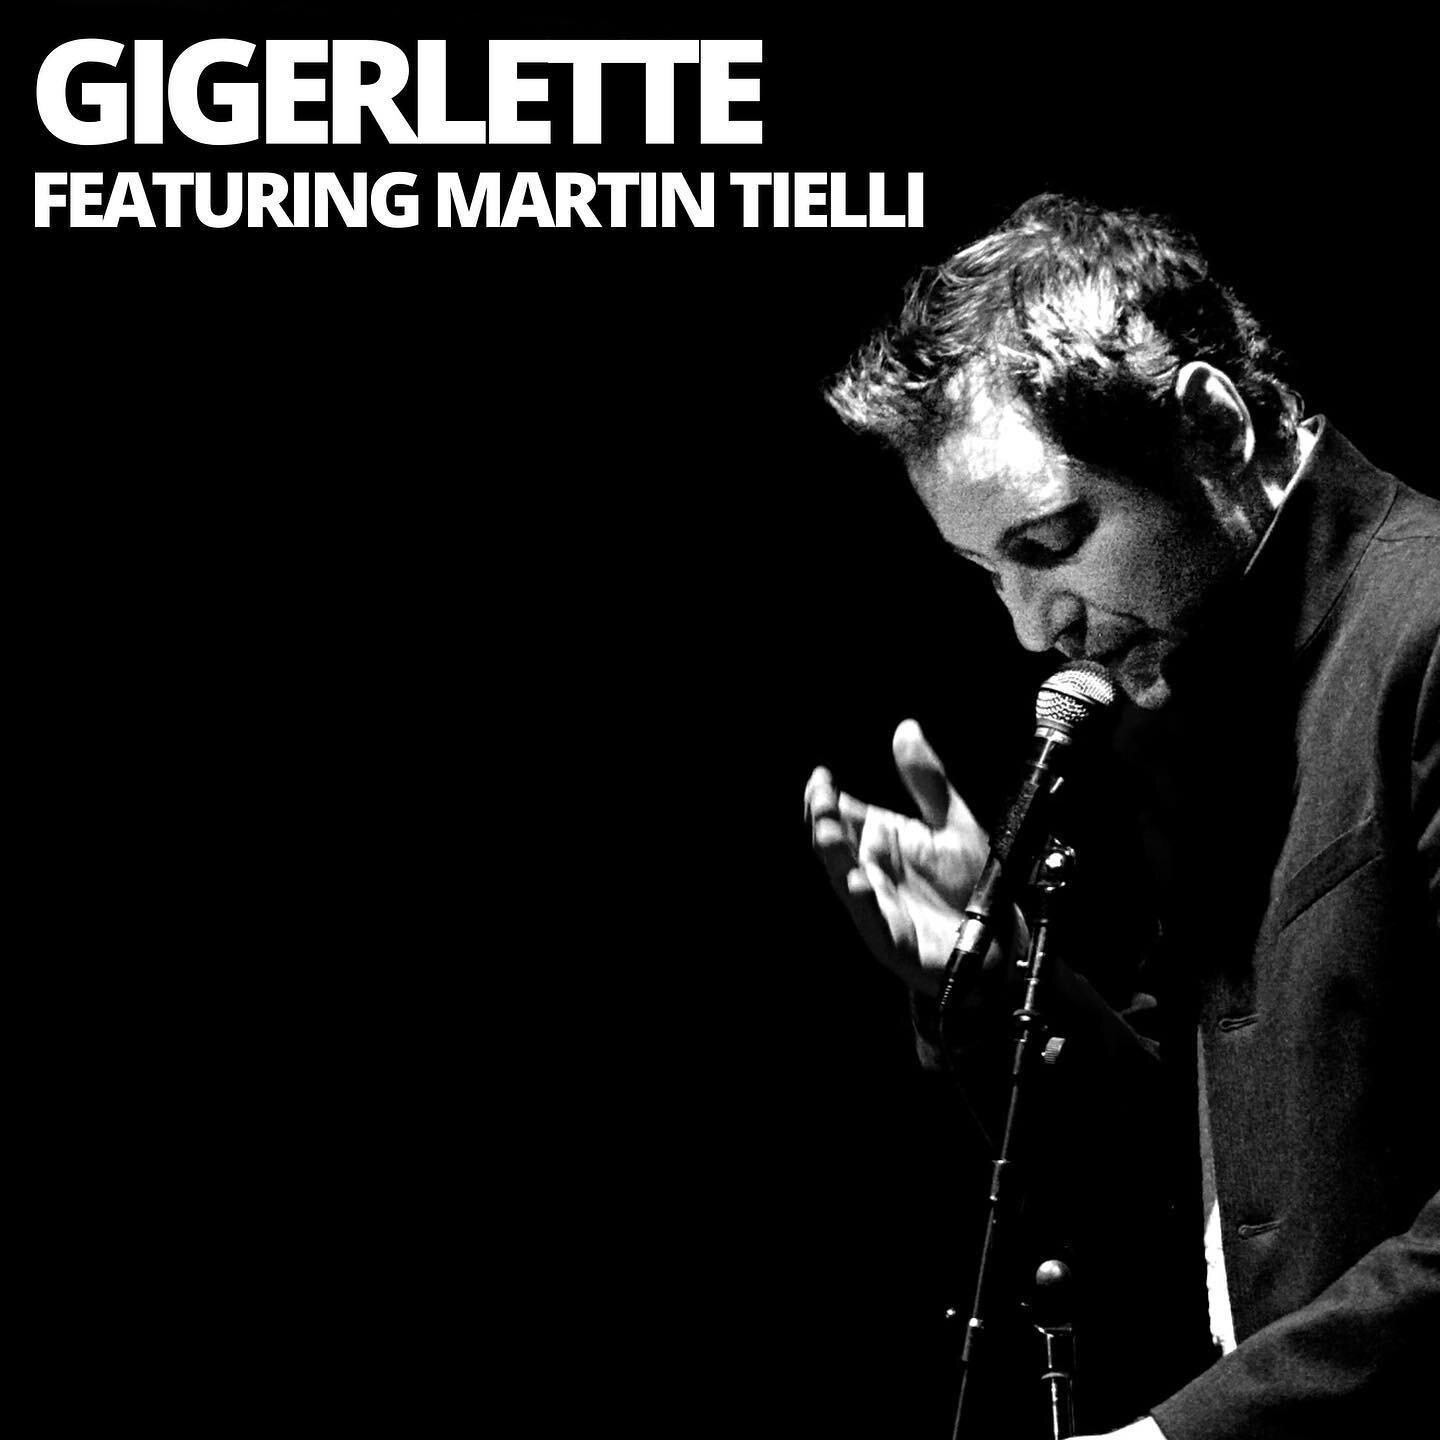 Another ingenious reinvention of a Schoenberg Cabaret Song arranged by Nick Buzz. This performance of Gigerlette, recorded in 2003 features vocals by Martin Tielli with Hugh Marsh on violin, Rob Piltch on guitar and Jonathan Goldsmith on piano. 

Fin